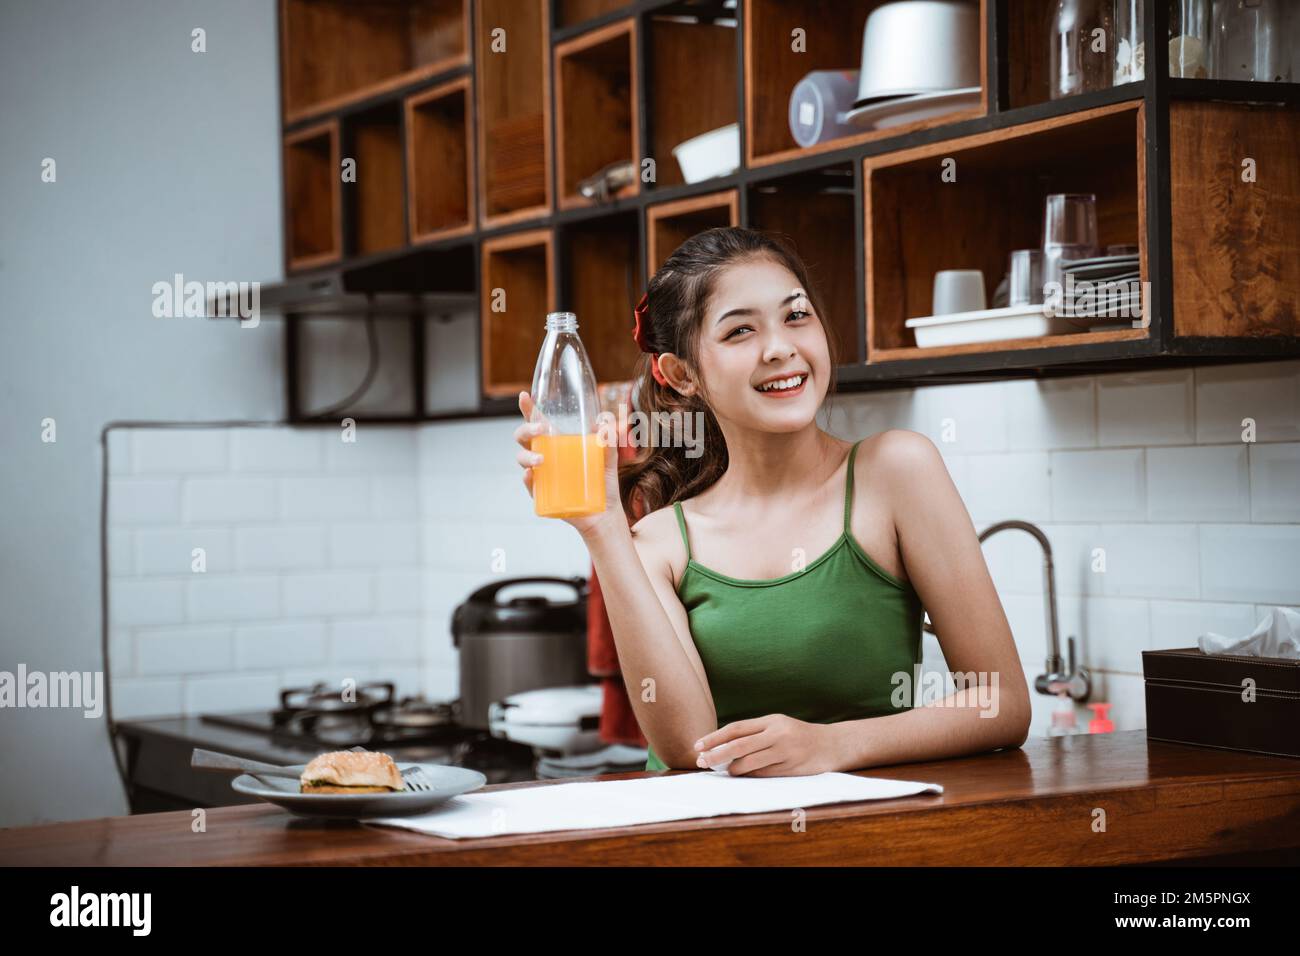 attractive asian girl smiling while holding orange bottle Stock Photo